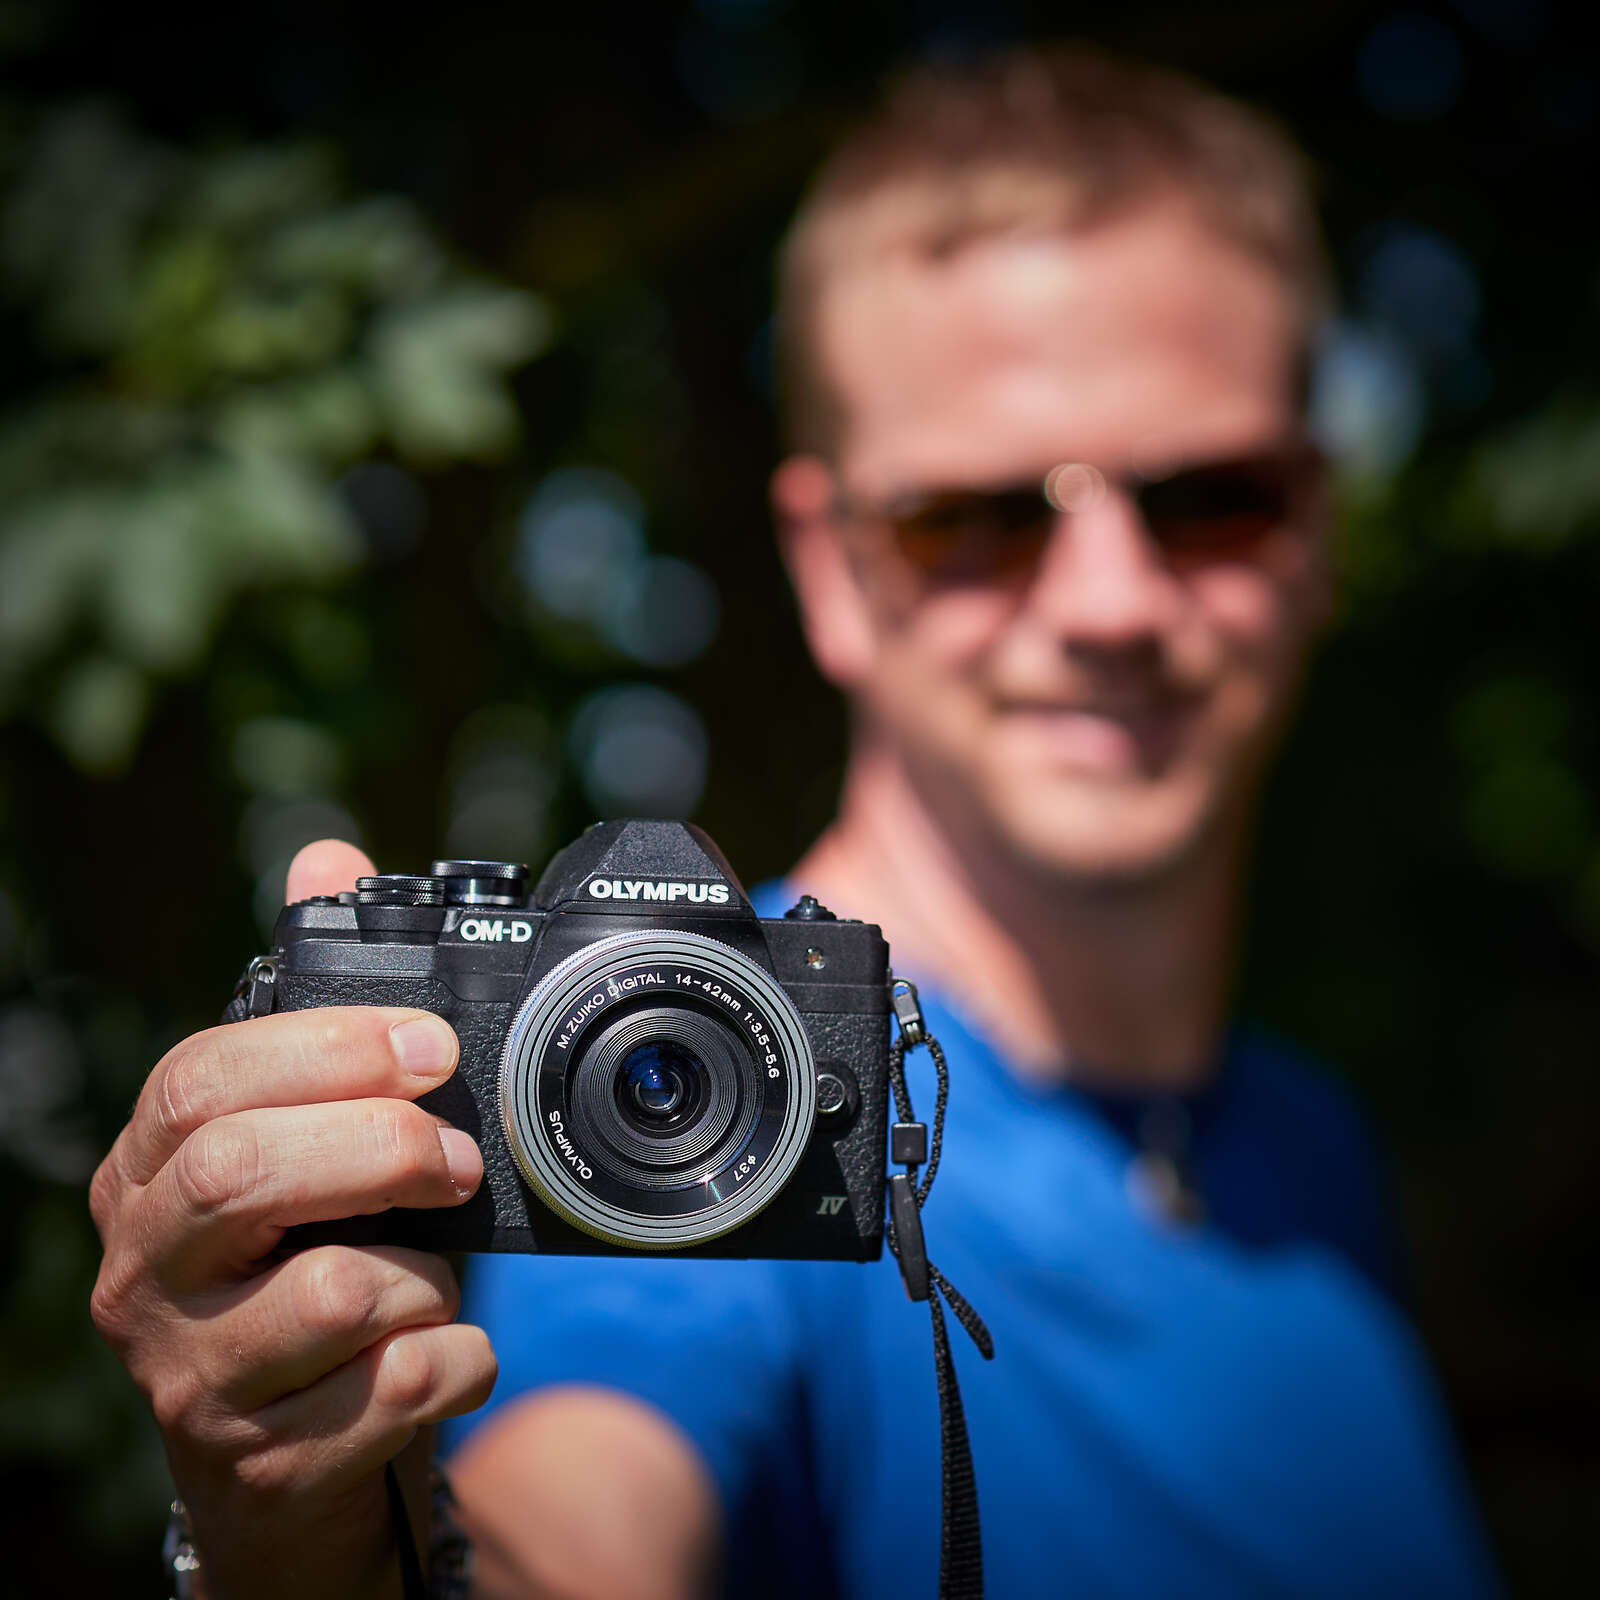 FIRST LOOK: Olympus OM-D E-M10 Mark IV - Photo Review